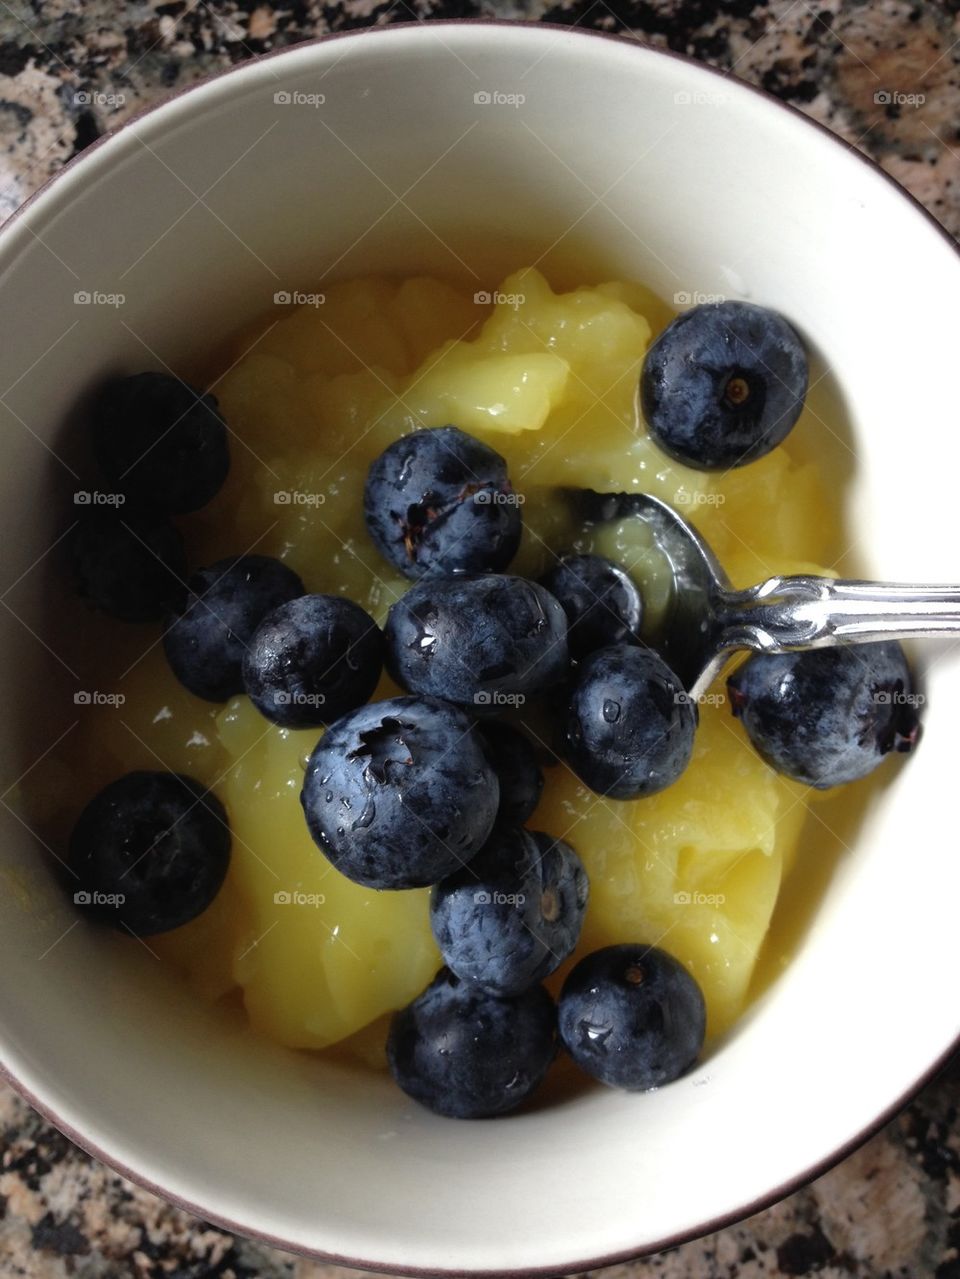 Lemon pudding with blueberries